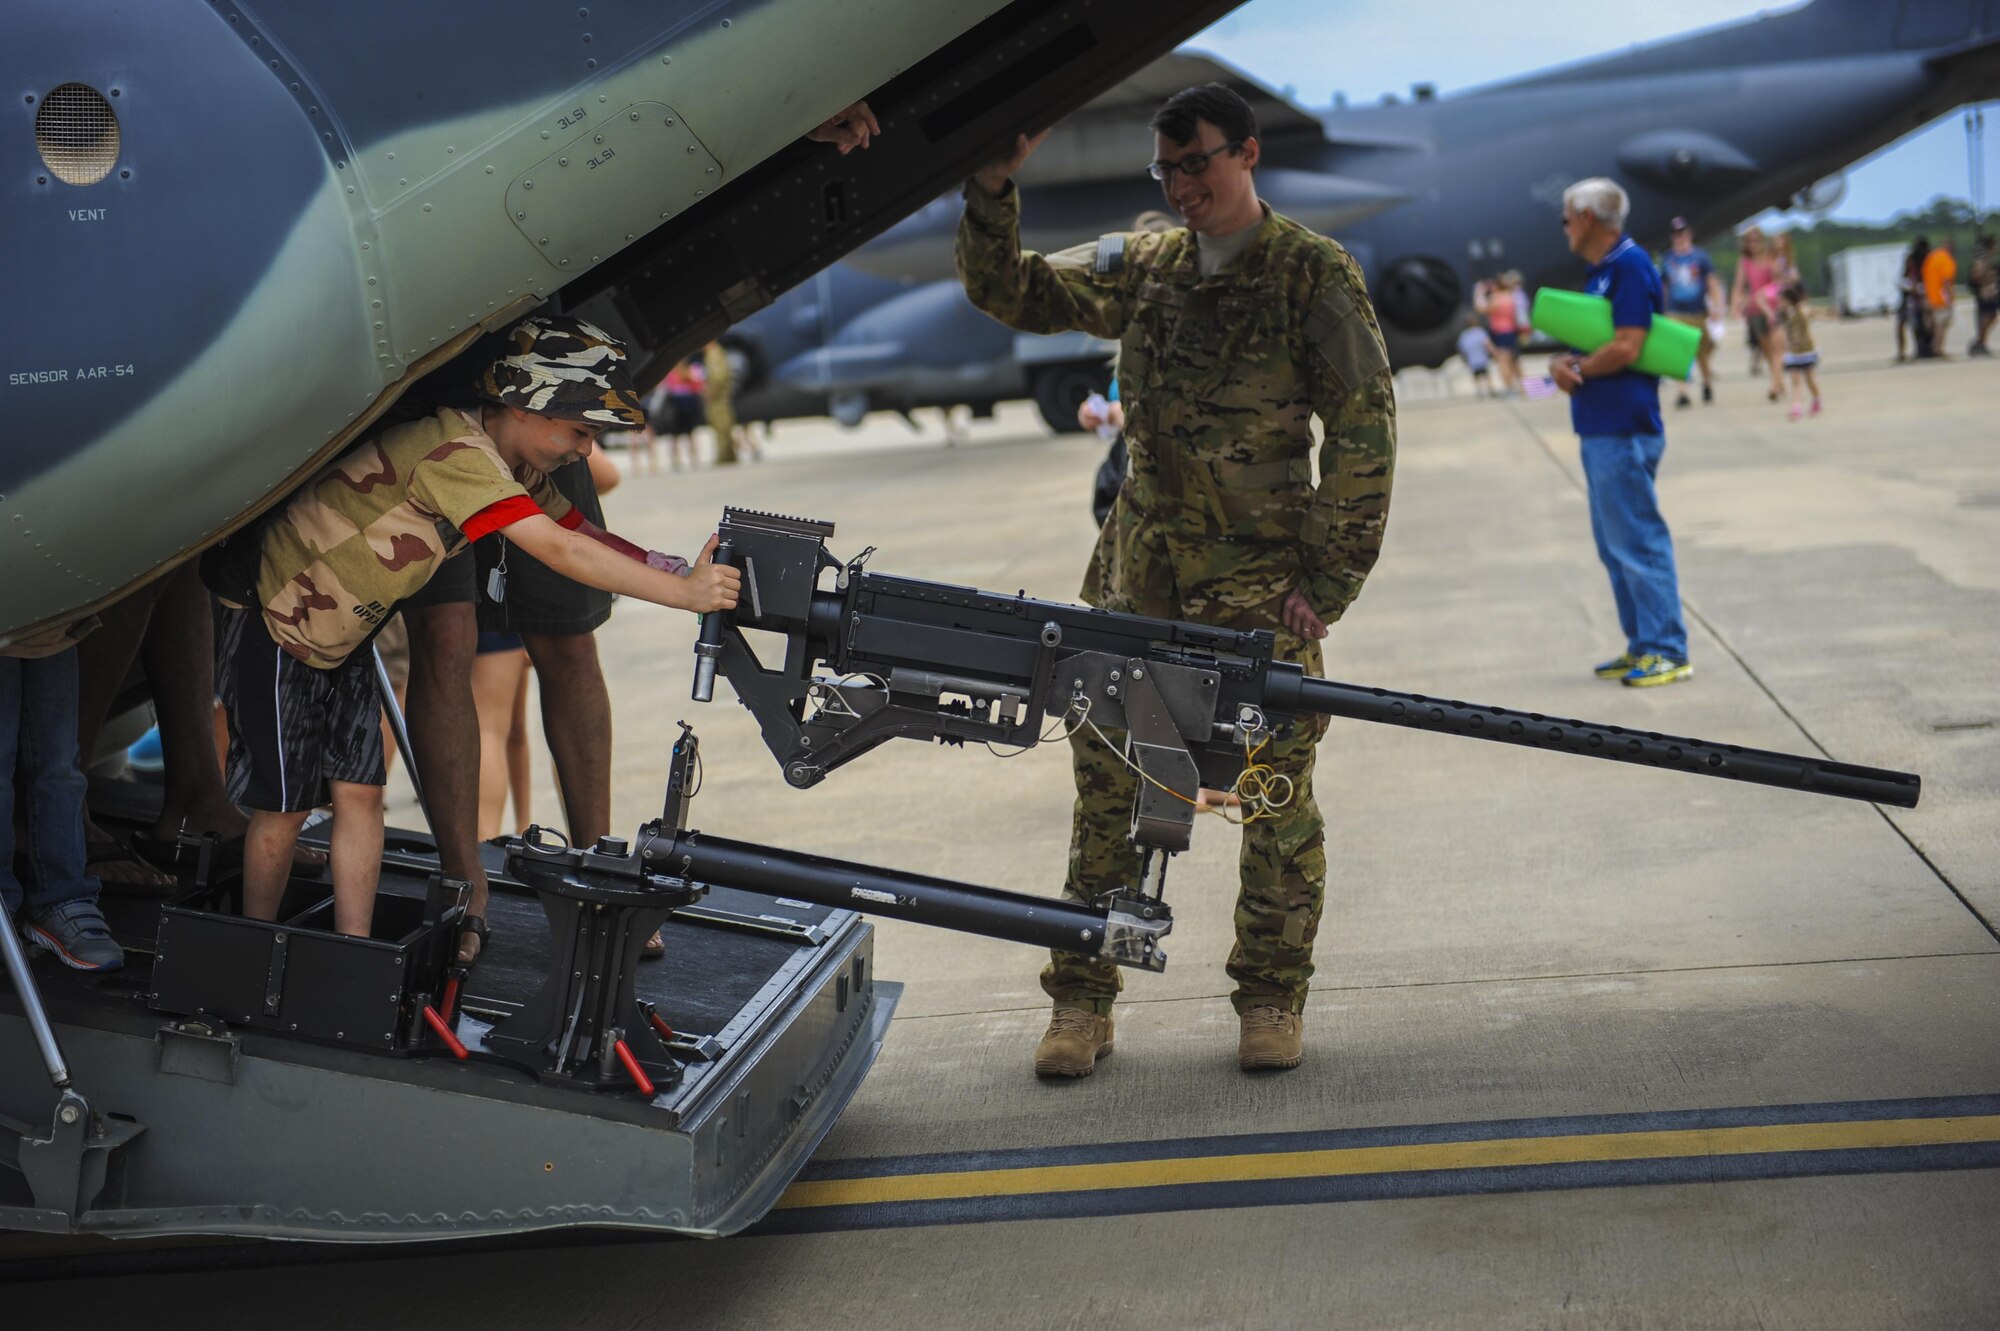 A child pretends to fire a 50-caliber machine gun on a CV-22 Osprey during Operation Kids Understanding Deployment Operations at Hurlburt Field, Fla., April 30, 2016. The School Liaison Program hosted KUDOS to educate kids on the deployment process, engaging them in activities that help show children similar situations their parents go through during pre-deployment. After a “homecoming” families were able to explore aircraft on the flightline. (U.S. Air Force photo by Senior Airman Meagan Schutter)